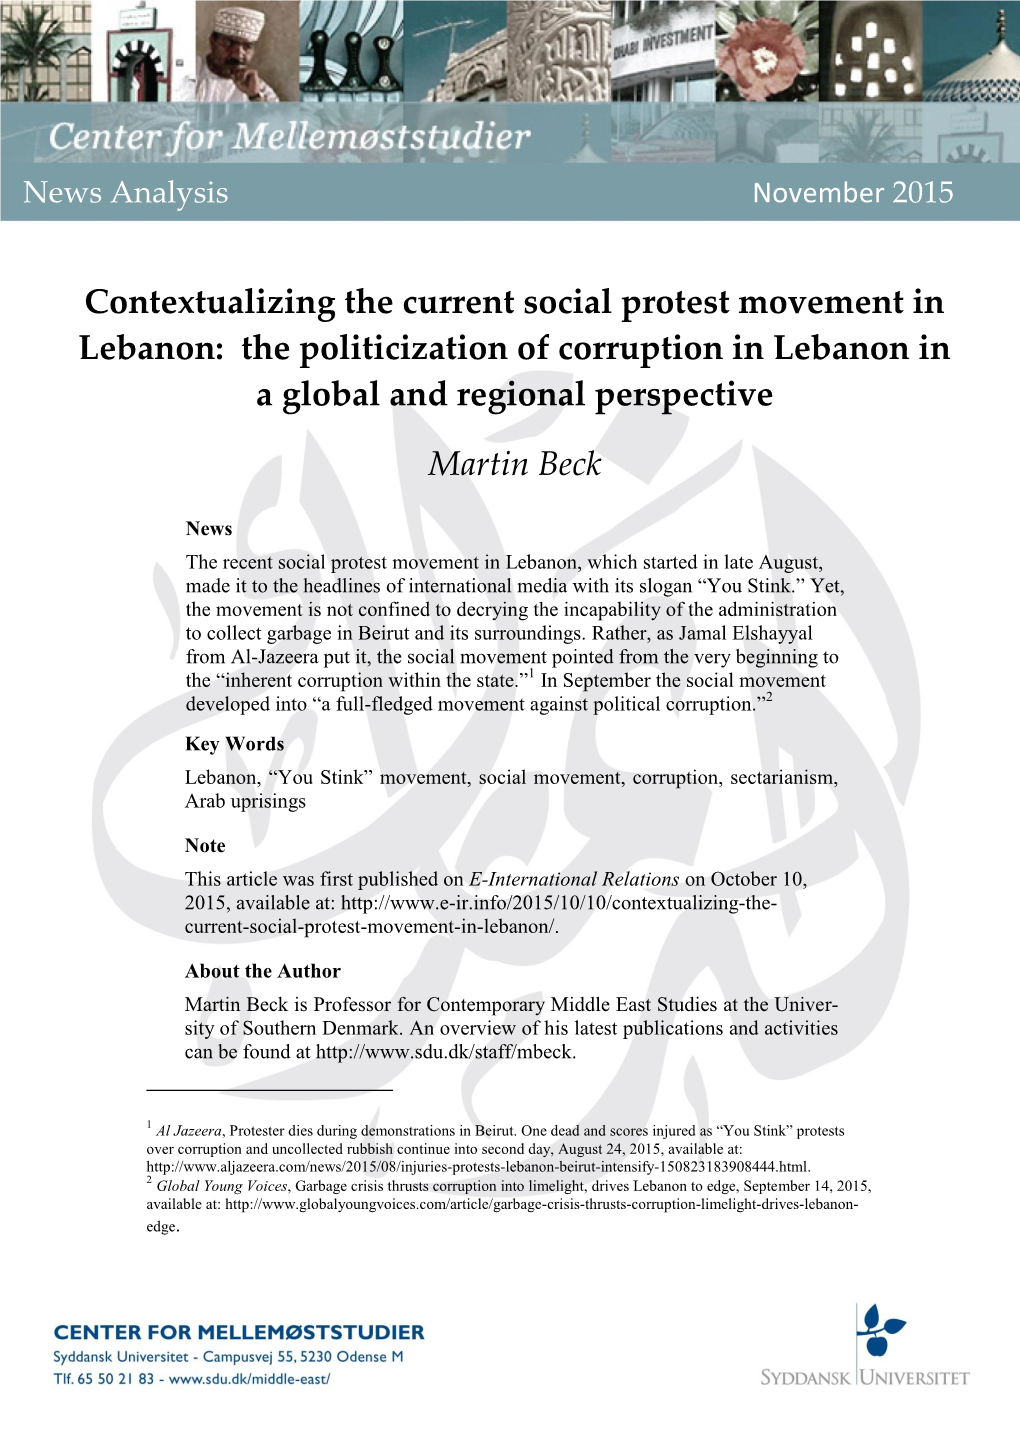 Contextualizing the Current Social Protest Movement in Lebanon: the Politicization of Corruption in Lebanon in a Global and Regional Perspective